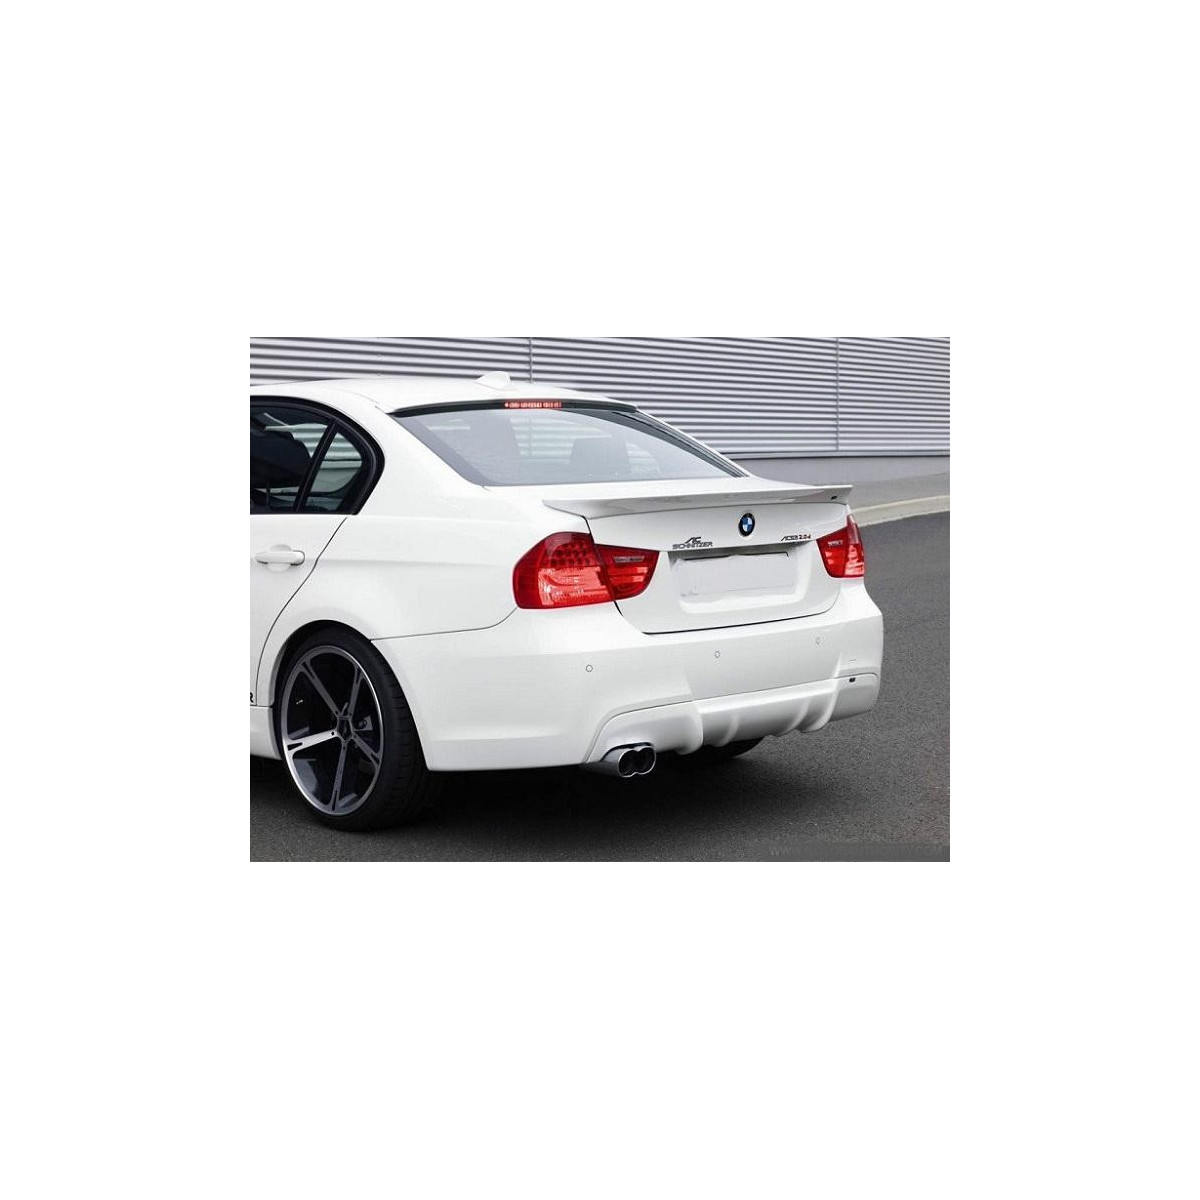 Lotka BMW 3 E90 4d ABS AC Style